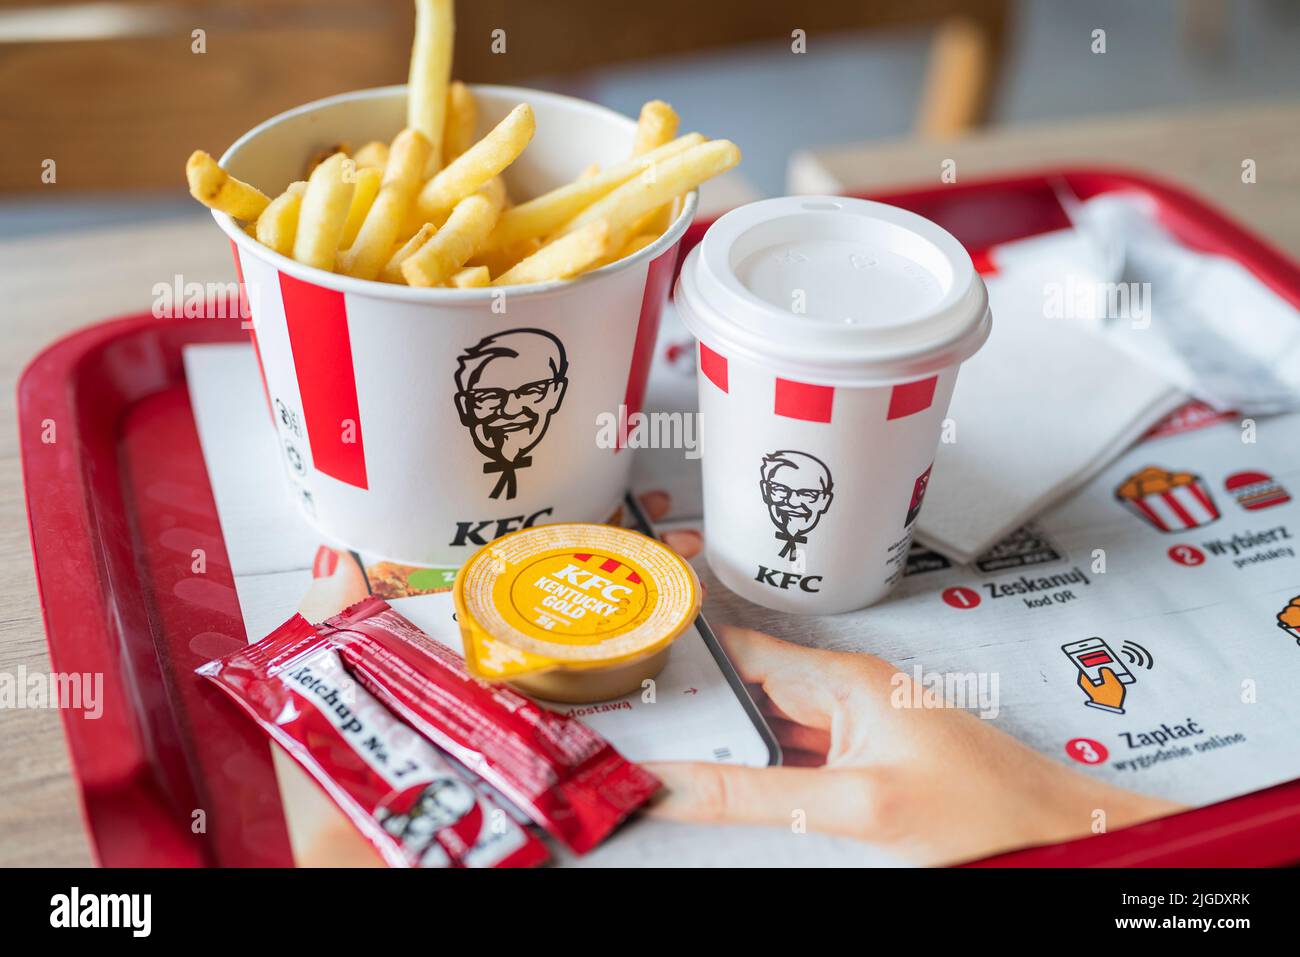 Wroclaw Poland, December 4, 2020. fast food menu french fries with sauce and coffee in KFC restaurant Stock Photo